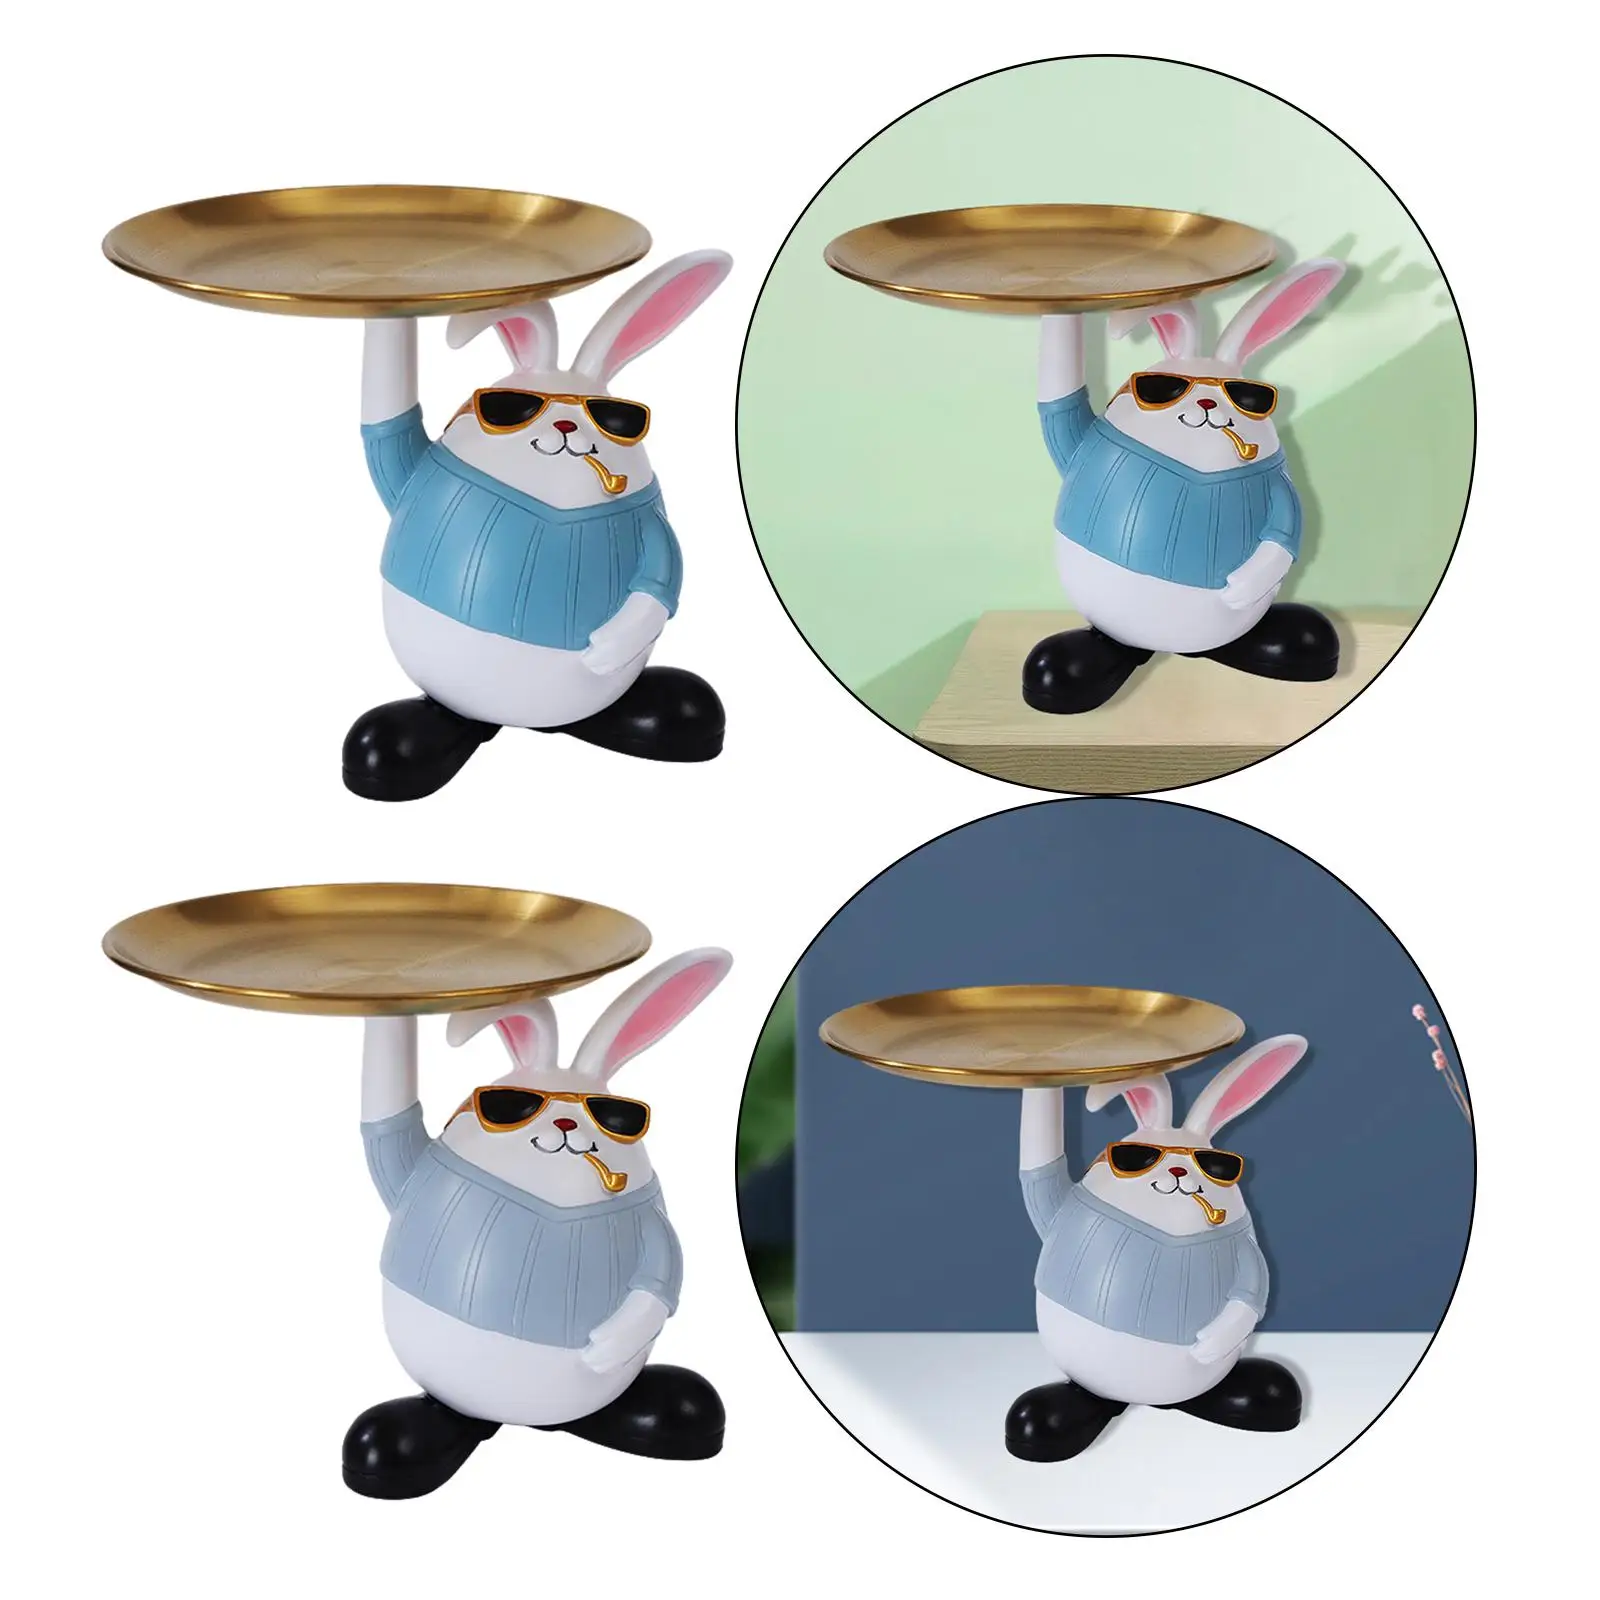 Creative Rabbit Storage Tray, Earrings Holder Jewelry Ring Tray Bunny Figurine Storage Box for Table Bar Home Party Decor